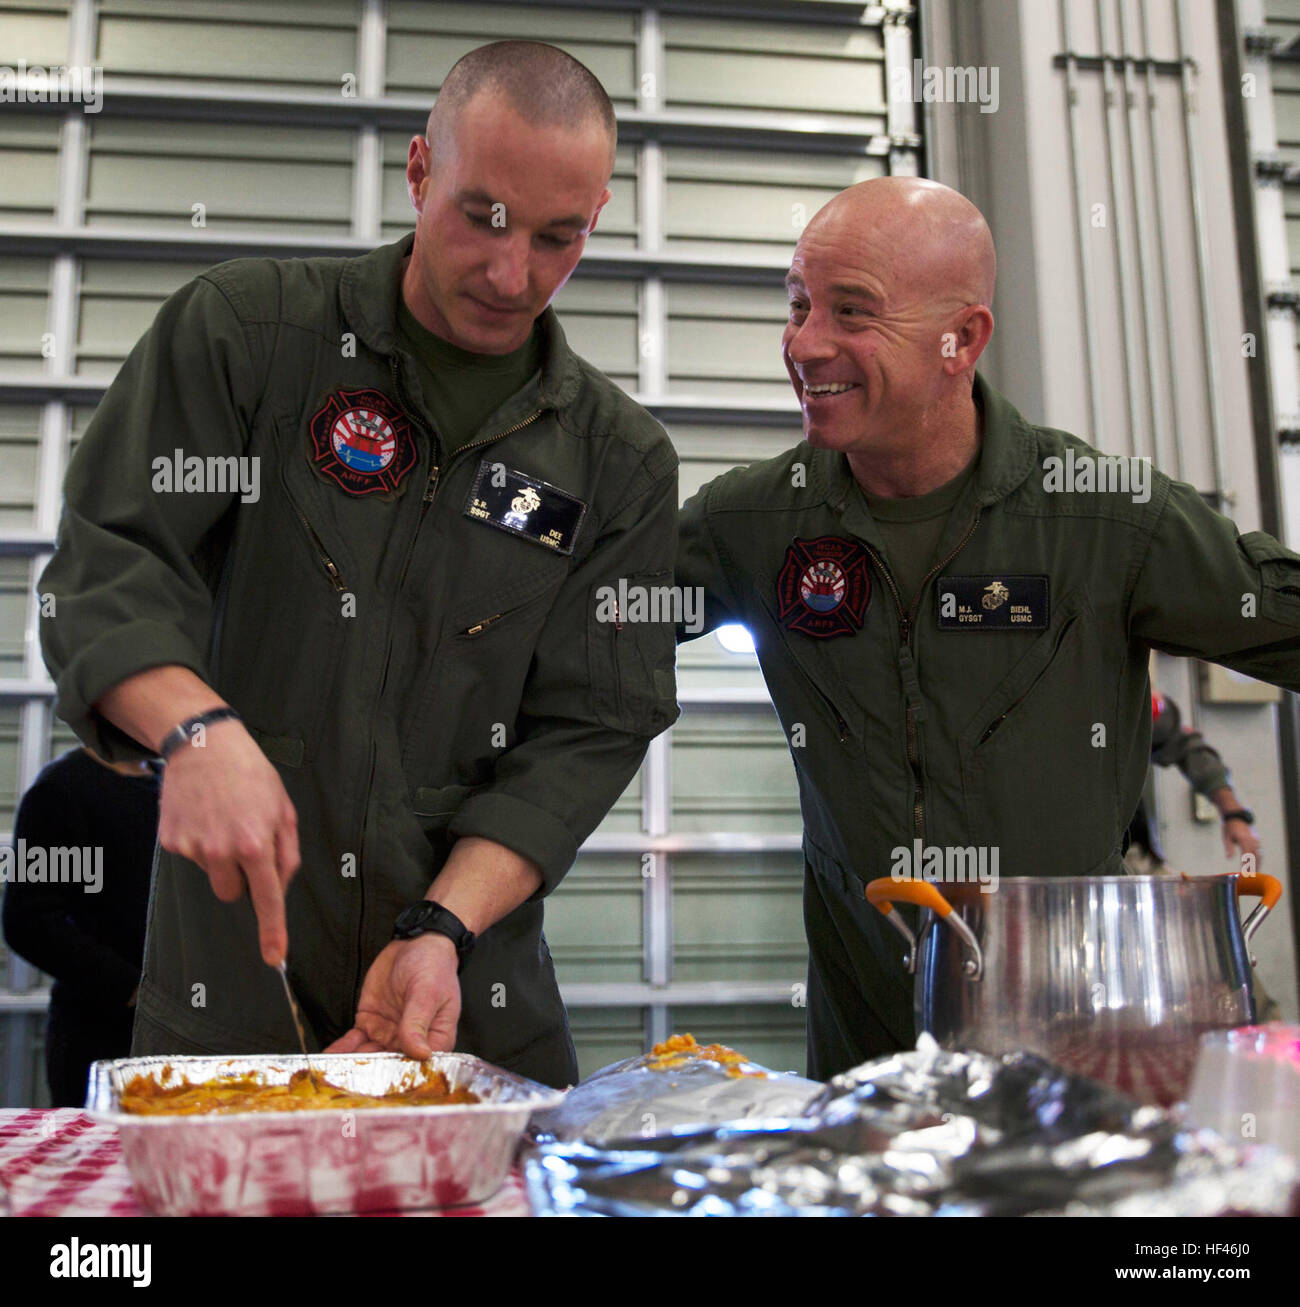 U.S. Marine Corps Staff Sgt. Sean Dee, left, the Aircraft Rescue and Firefighting station captain, and Gunnery Sgt. Matthew Viehl, assistant chief of operations at ARFF, prepare to serve food for the ARFF Tsuta Orphanage Christmas party at Marine Corps Air Station Iwakuni, Japan, Dec. 10, 2016. ARFF holds the party annually to help spread Christmas cheer to the orphans and to bring service members, their families and the Japanese together. Marines volunteered their time and provided the children with a homemade, American meal. (U.S. Marine Corps photo by Lance Cpl. Gabriela Garcia-Herrera) Air Stock Photo